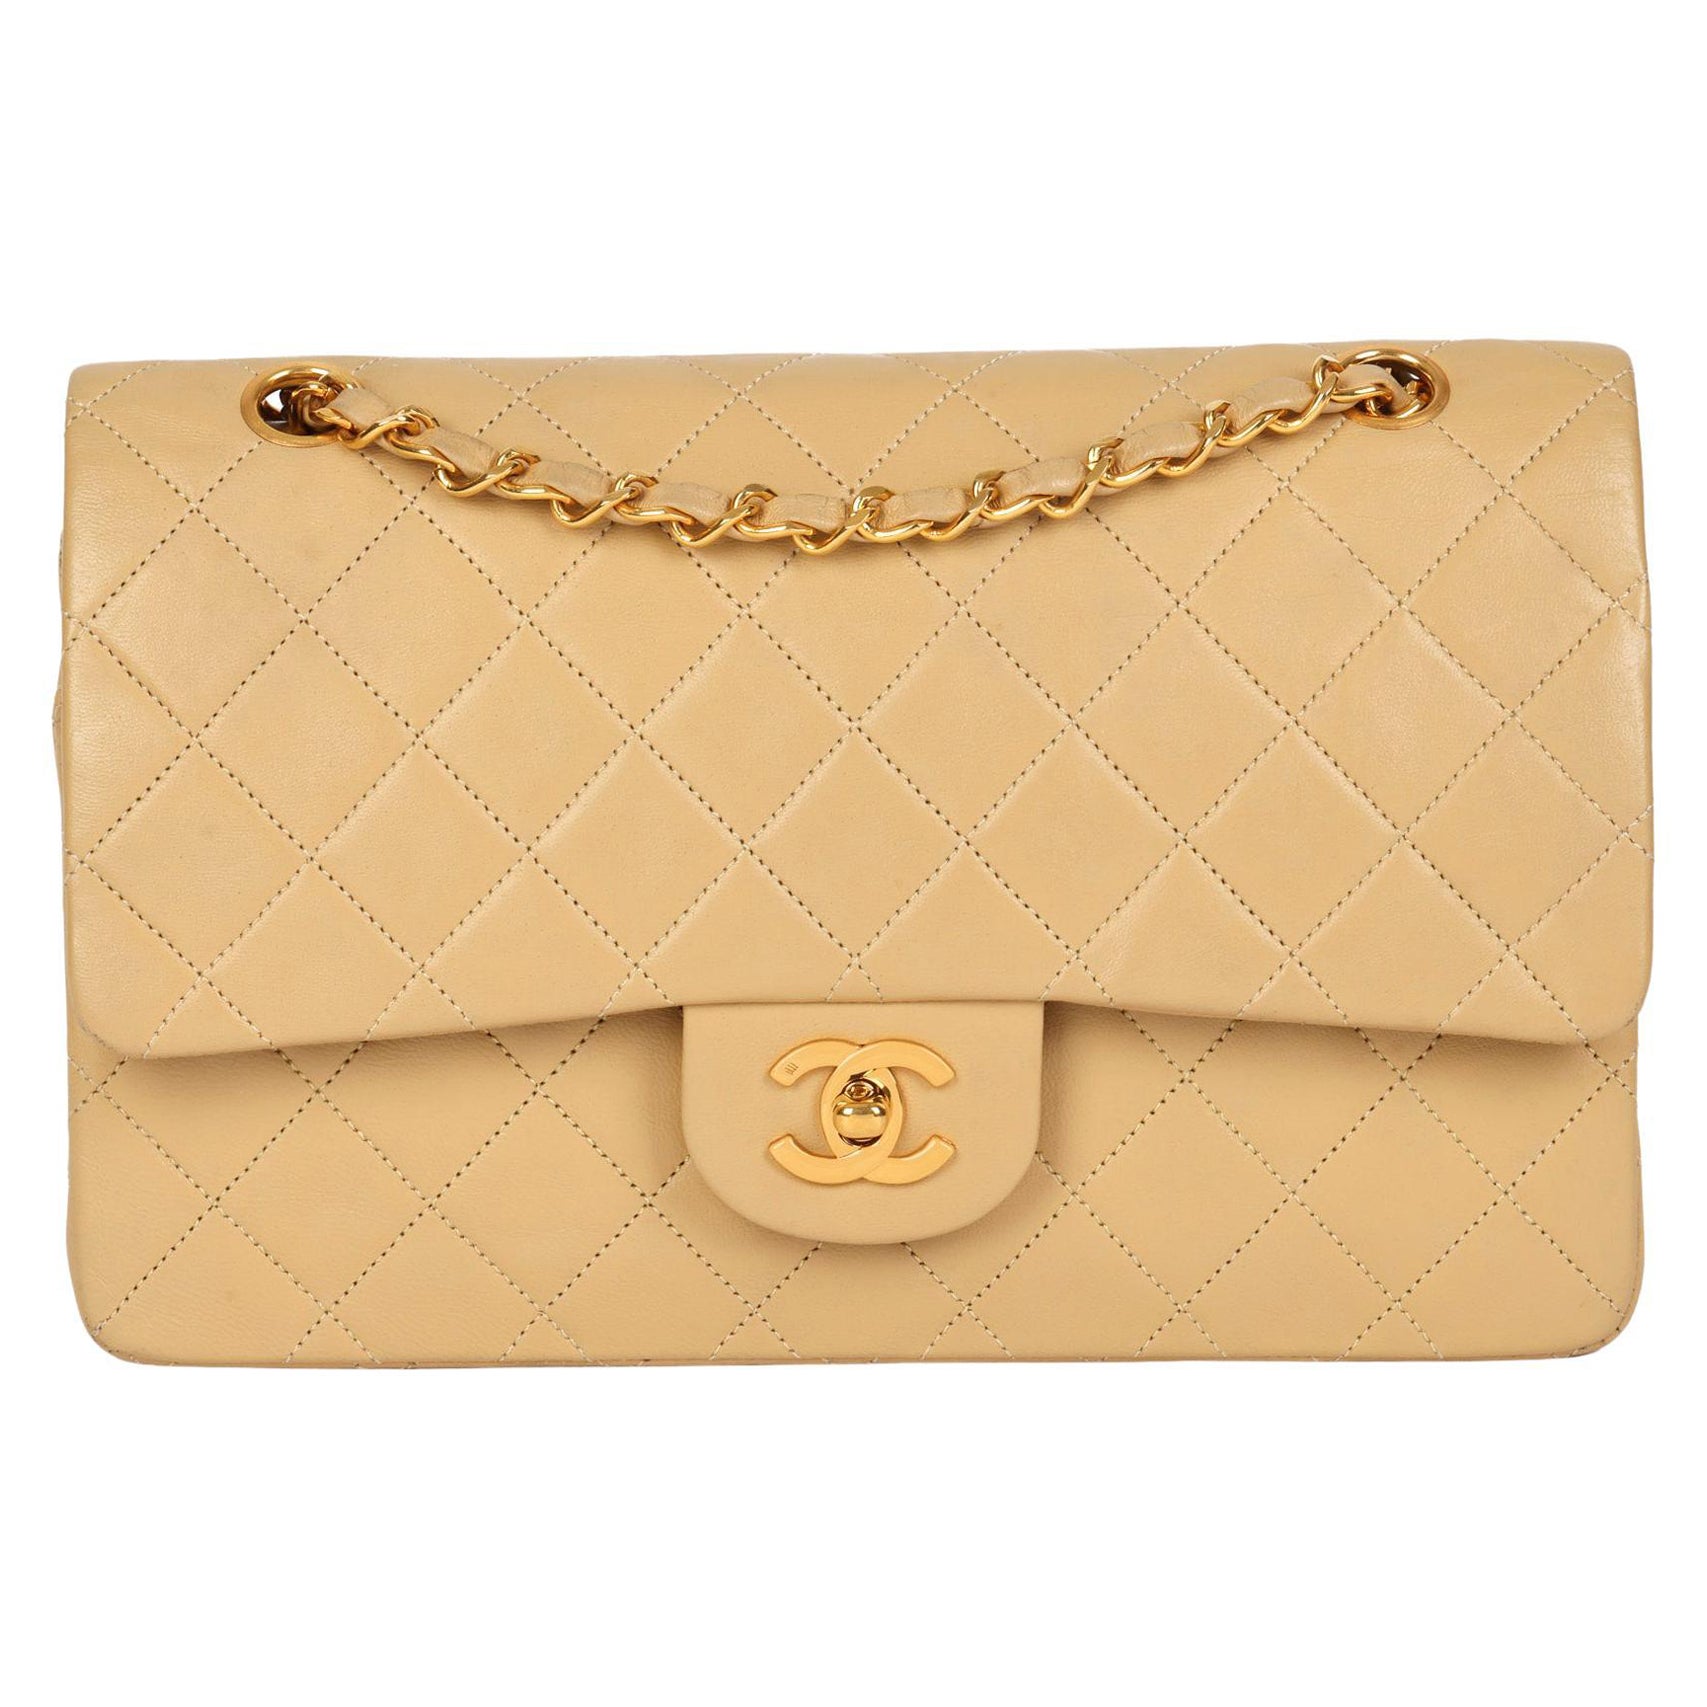 CHANEL Beige Quilted Lambskin Vintage Medium Classic Double Flap Bag